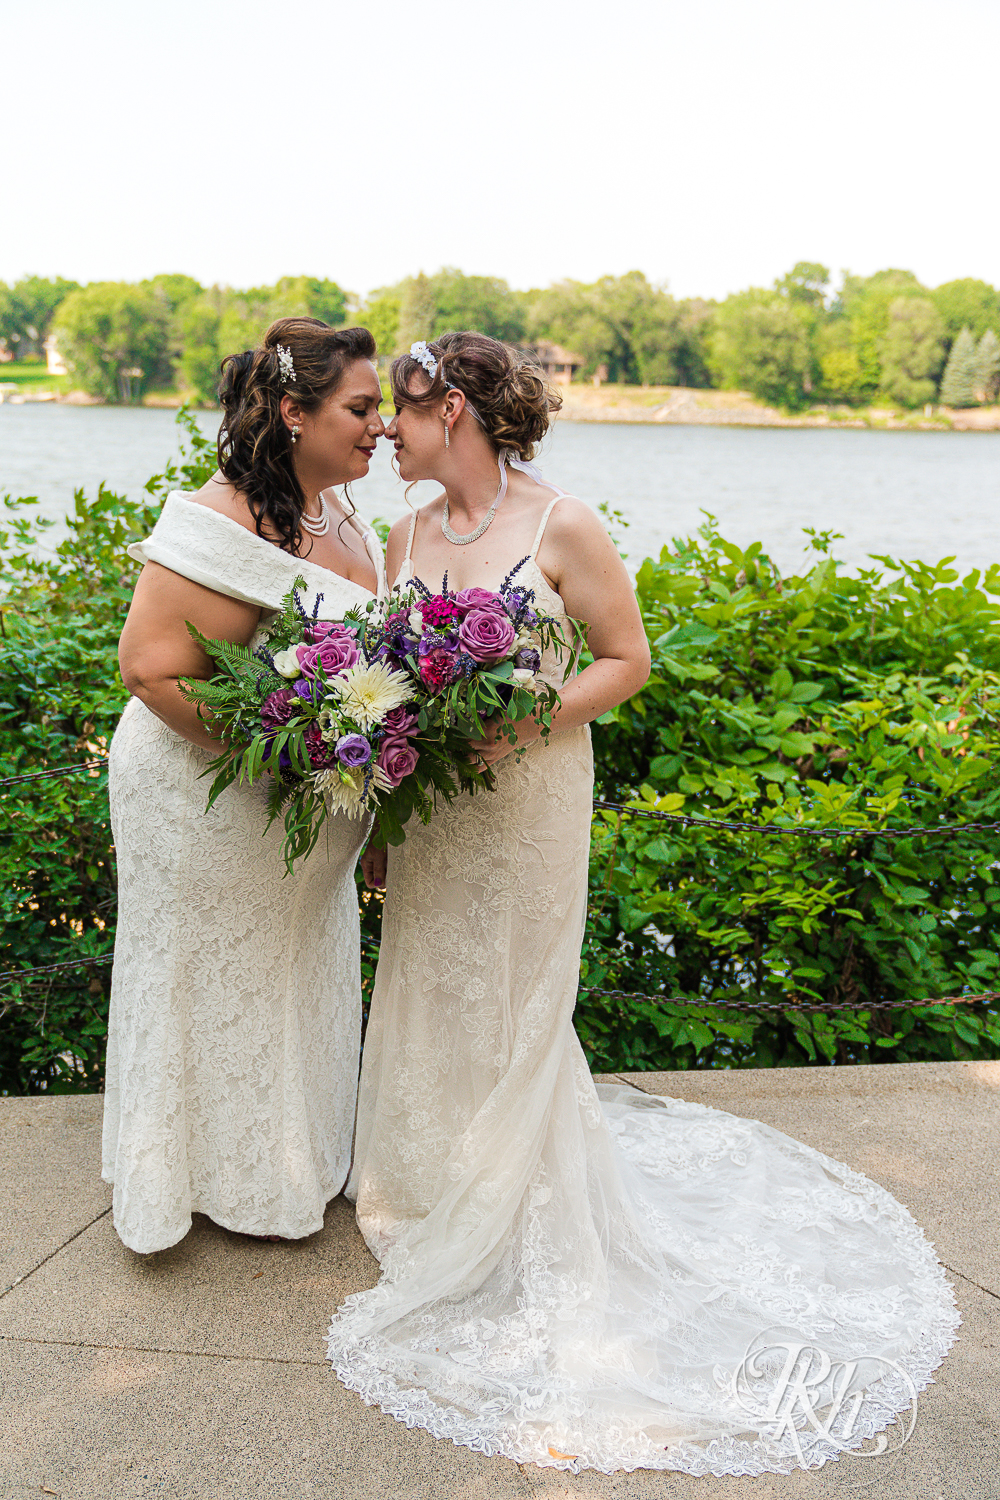 Lesbian brides holding flowers and smiling by the water at wedding in Champlin, Minnesota.